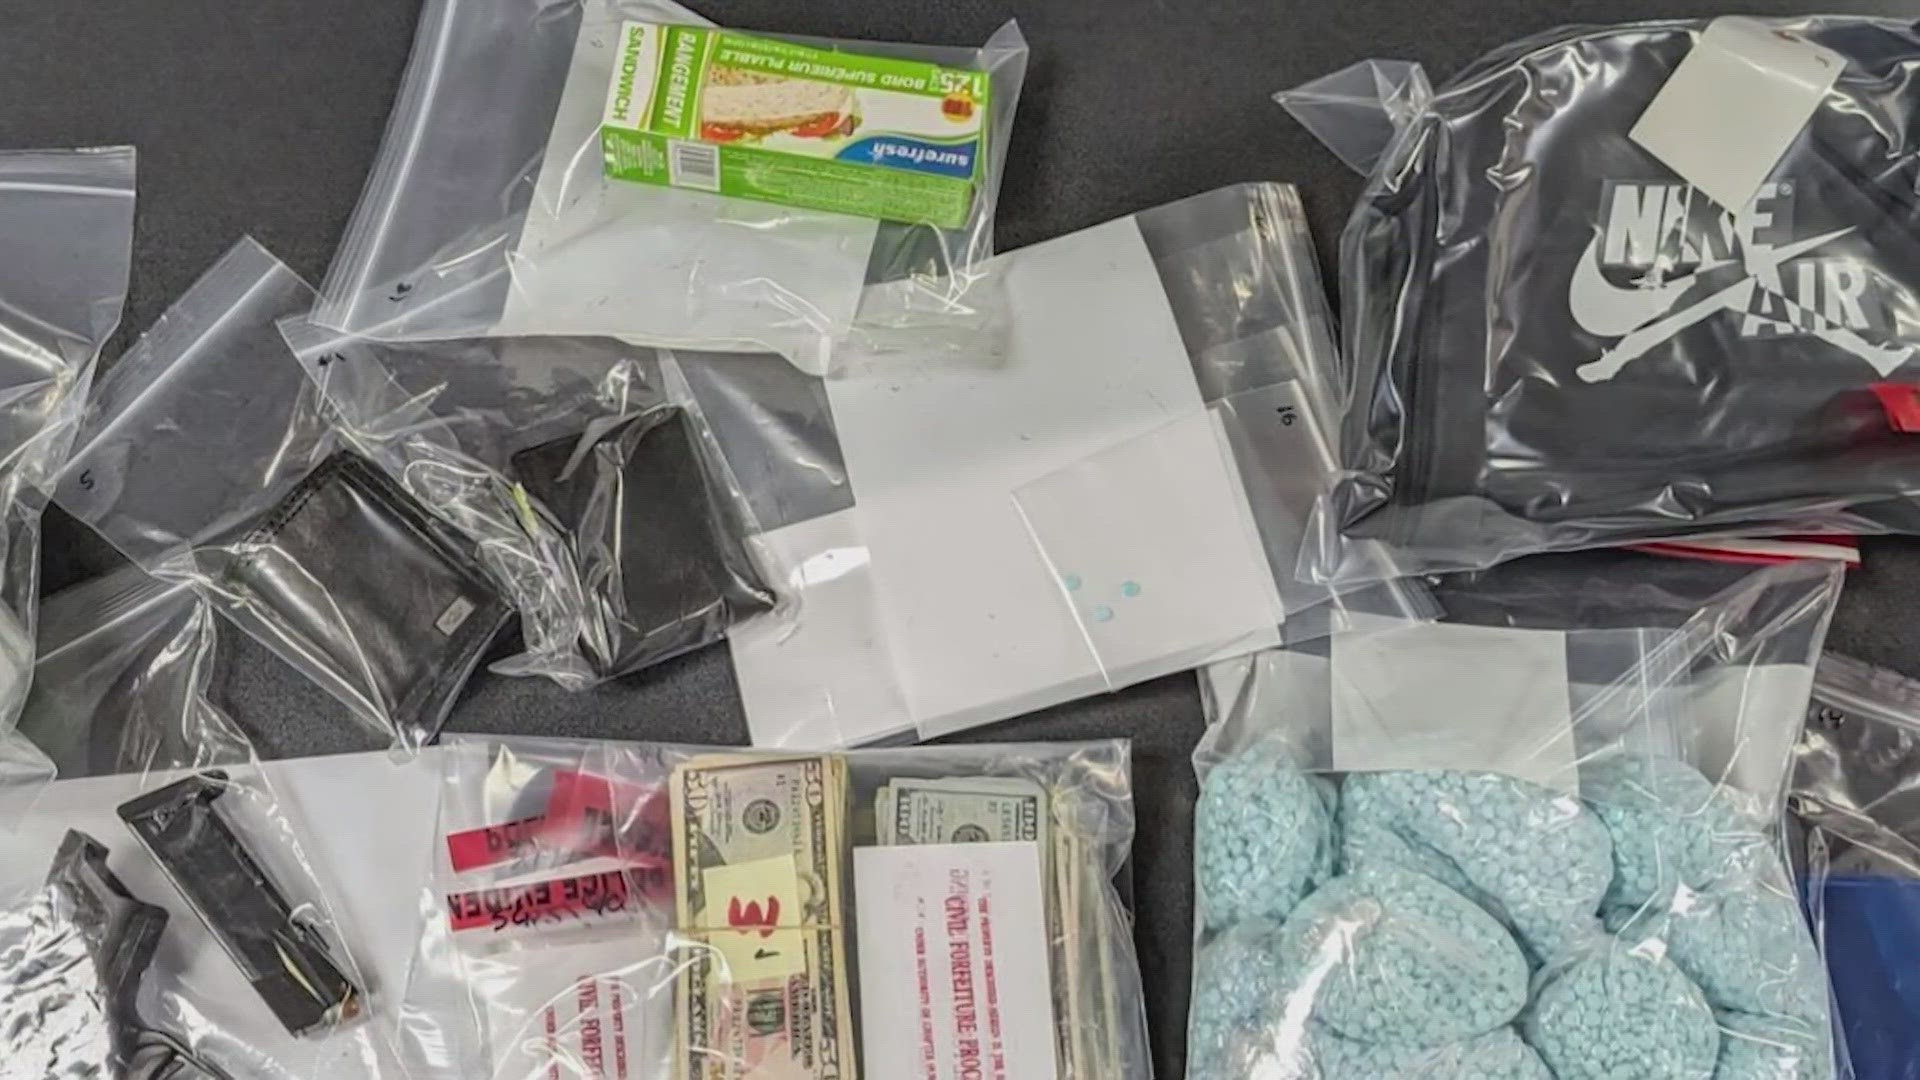 Tacoma police seized approximately 22,000 fentanyl pills, $10,750 in cash and a stolen handgun at the suspect residence and vehicle.